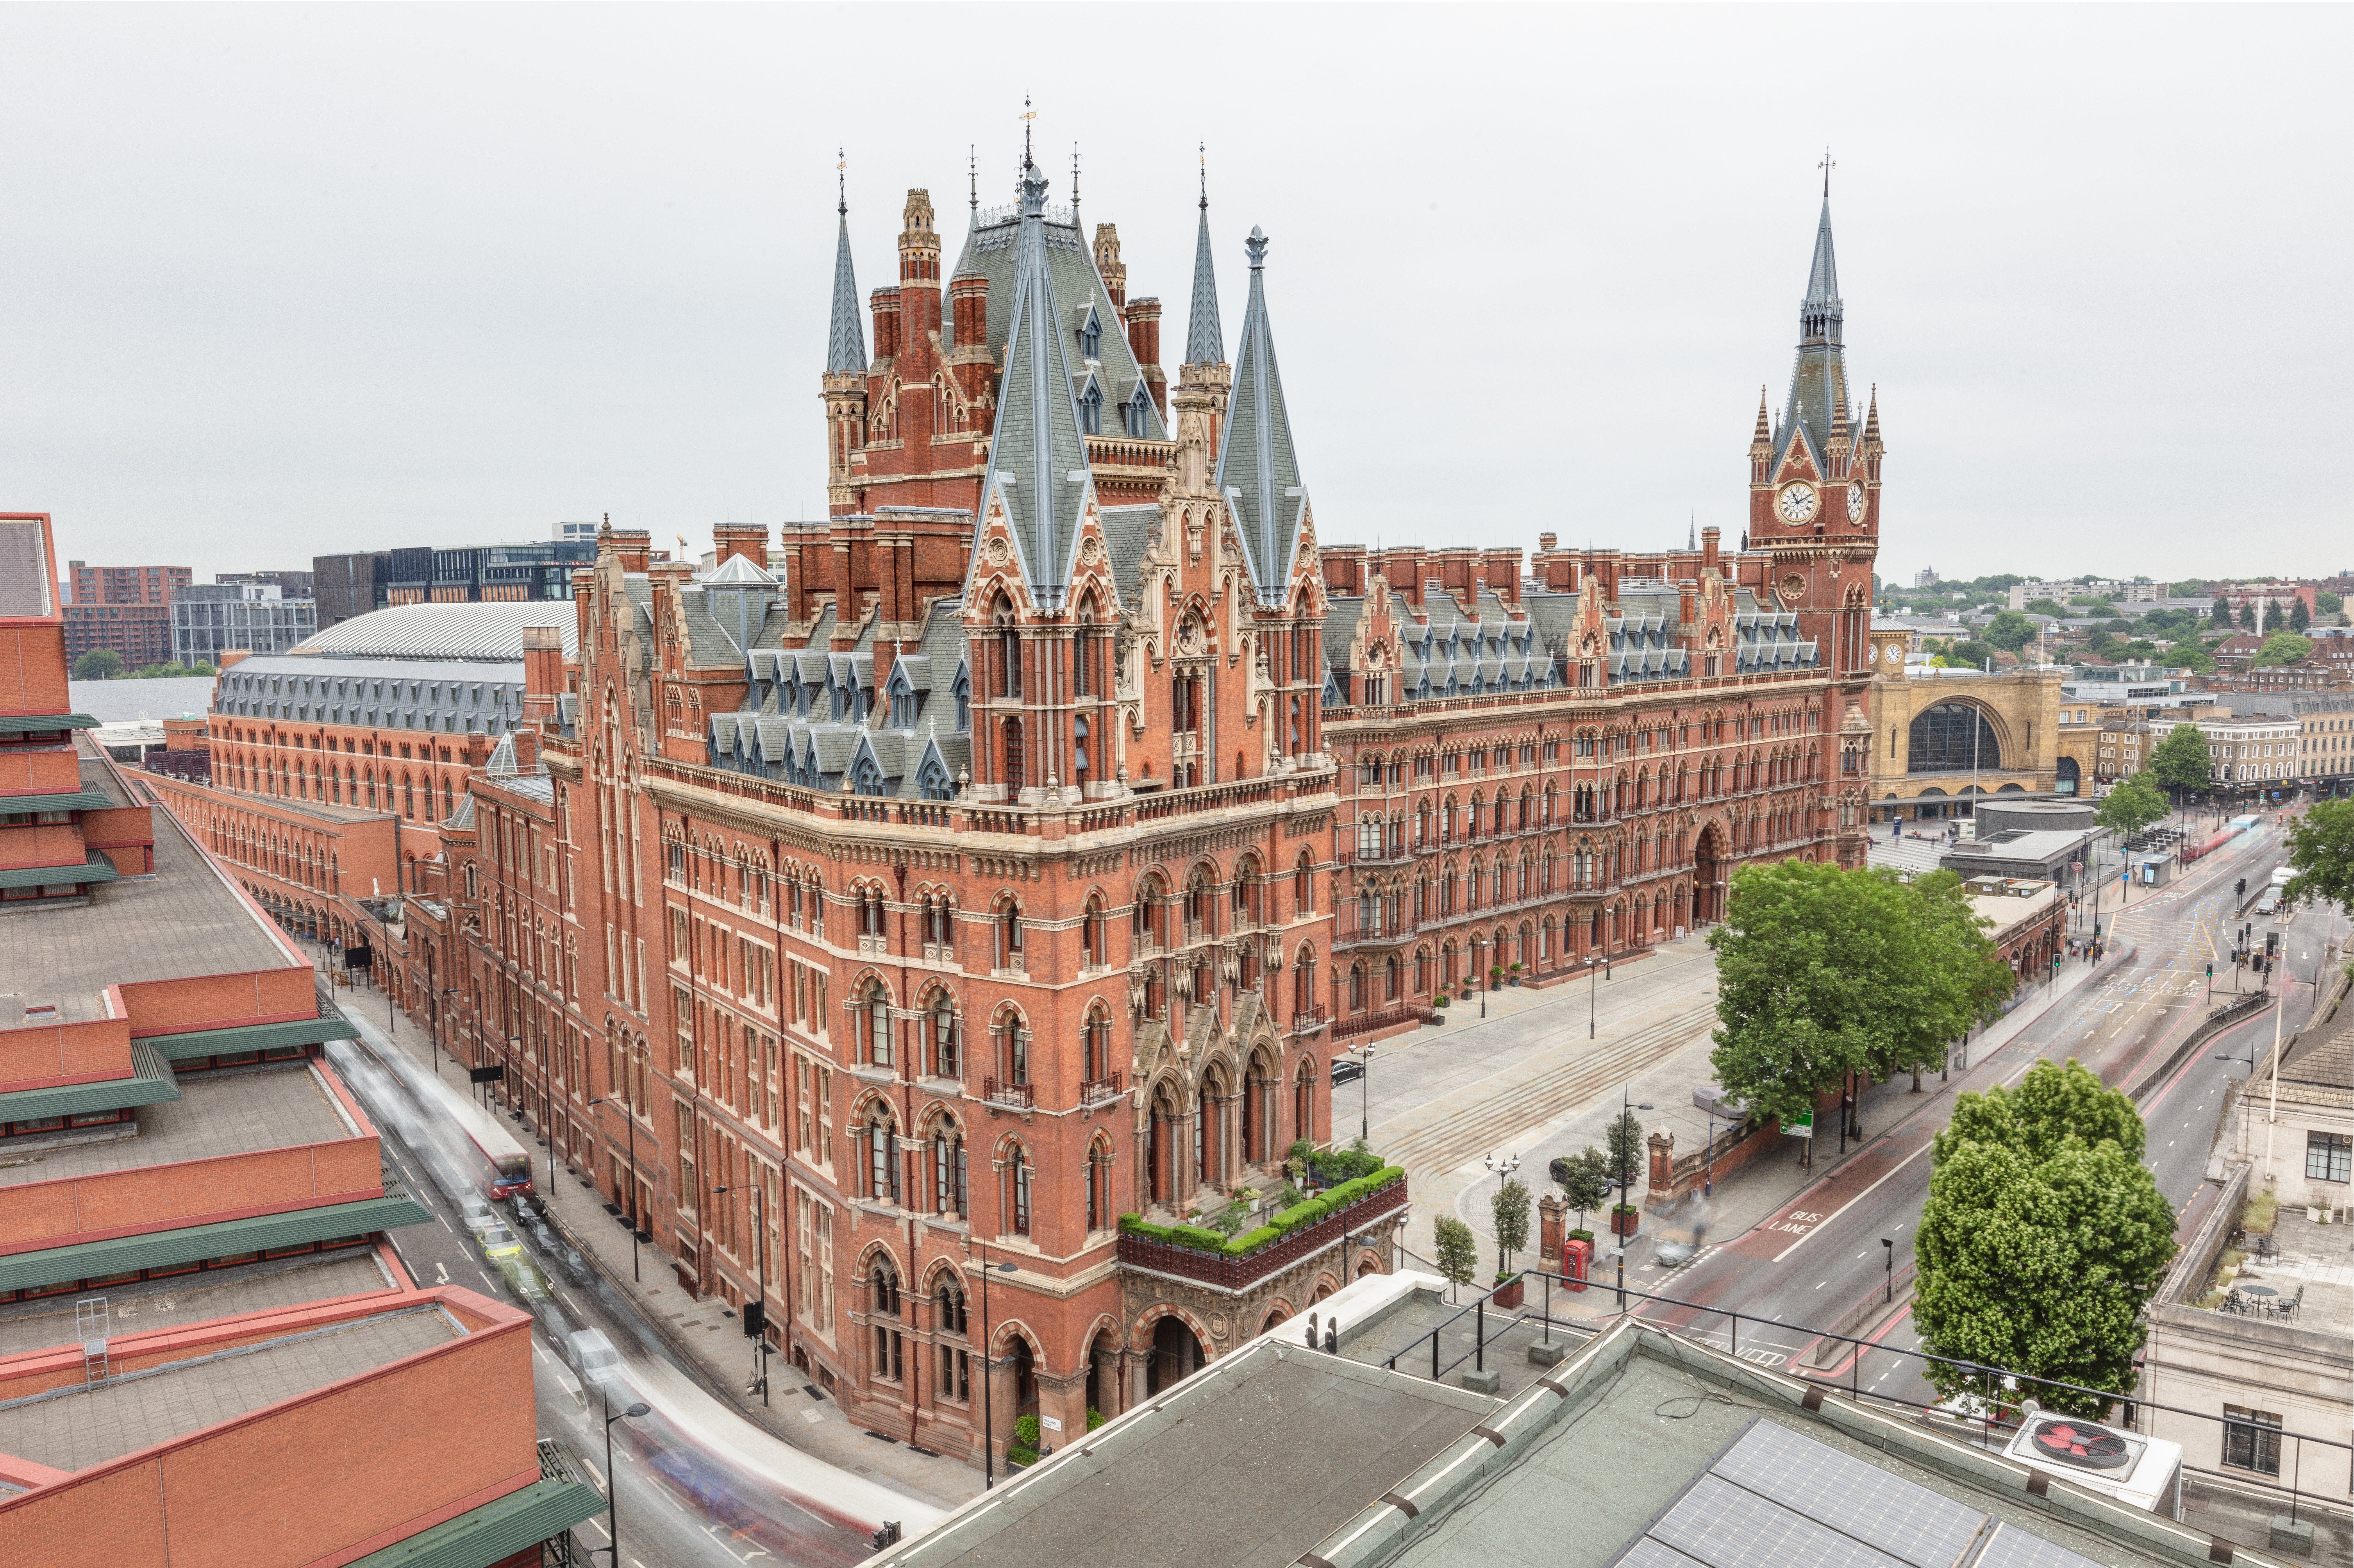 The Renaissance Hotel offers soaring gothic architecture